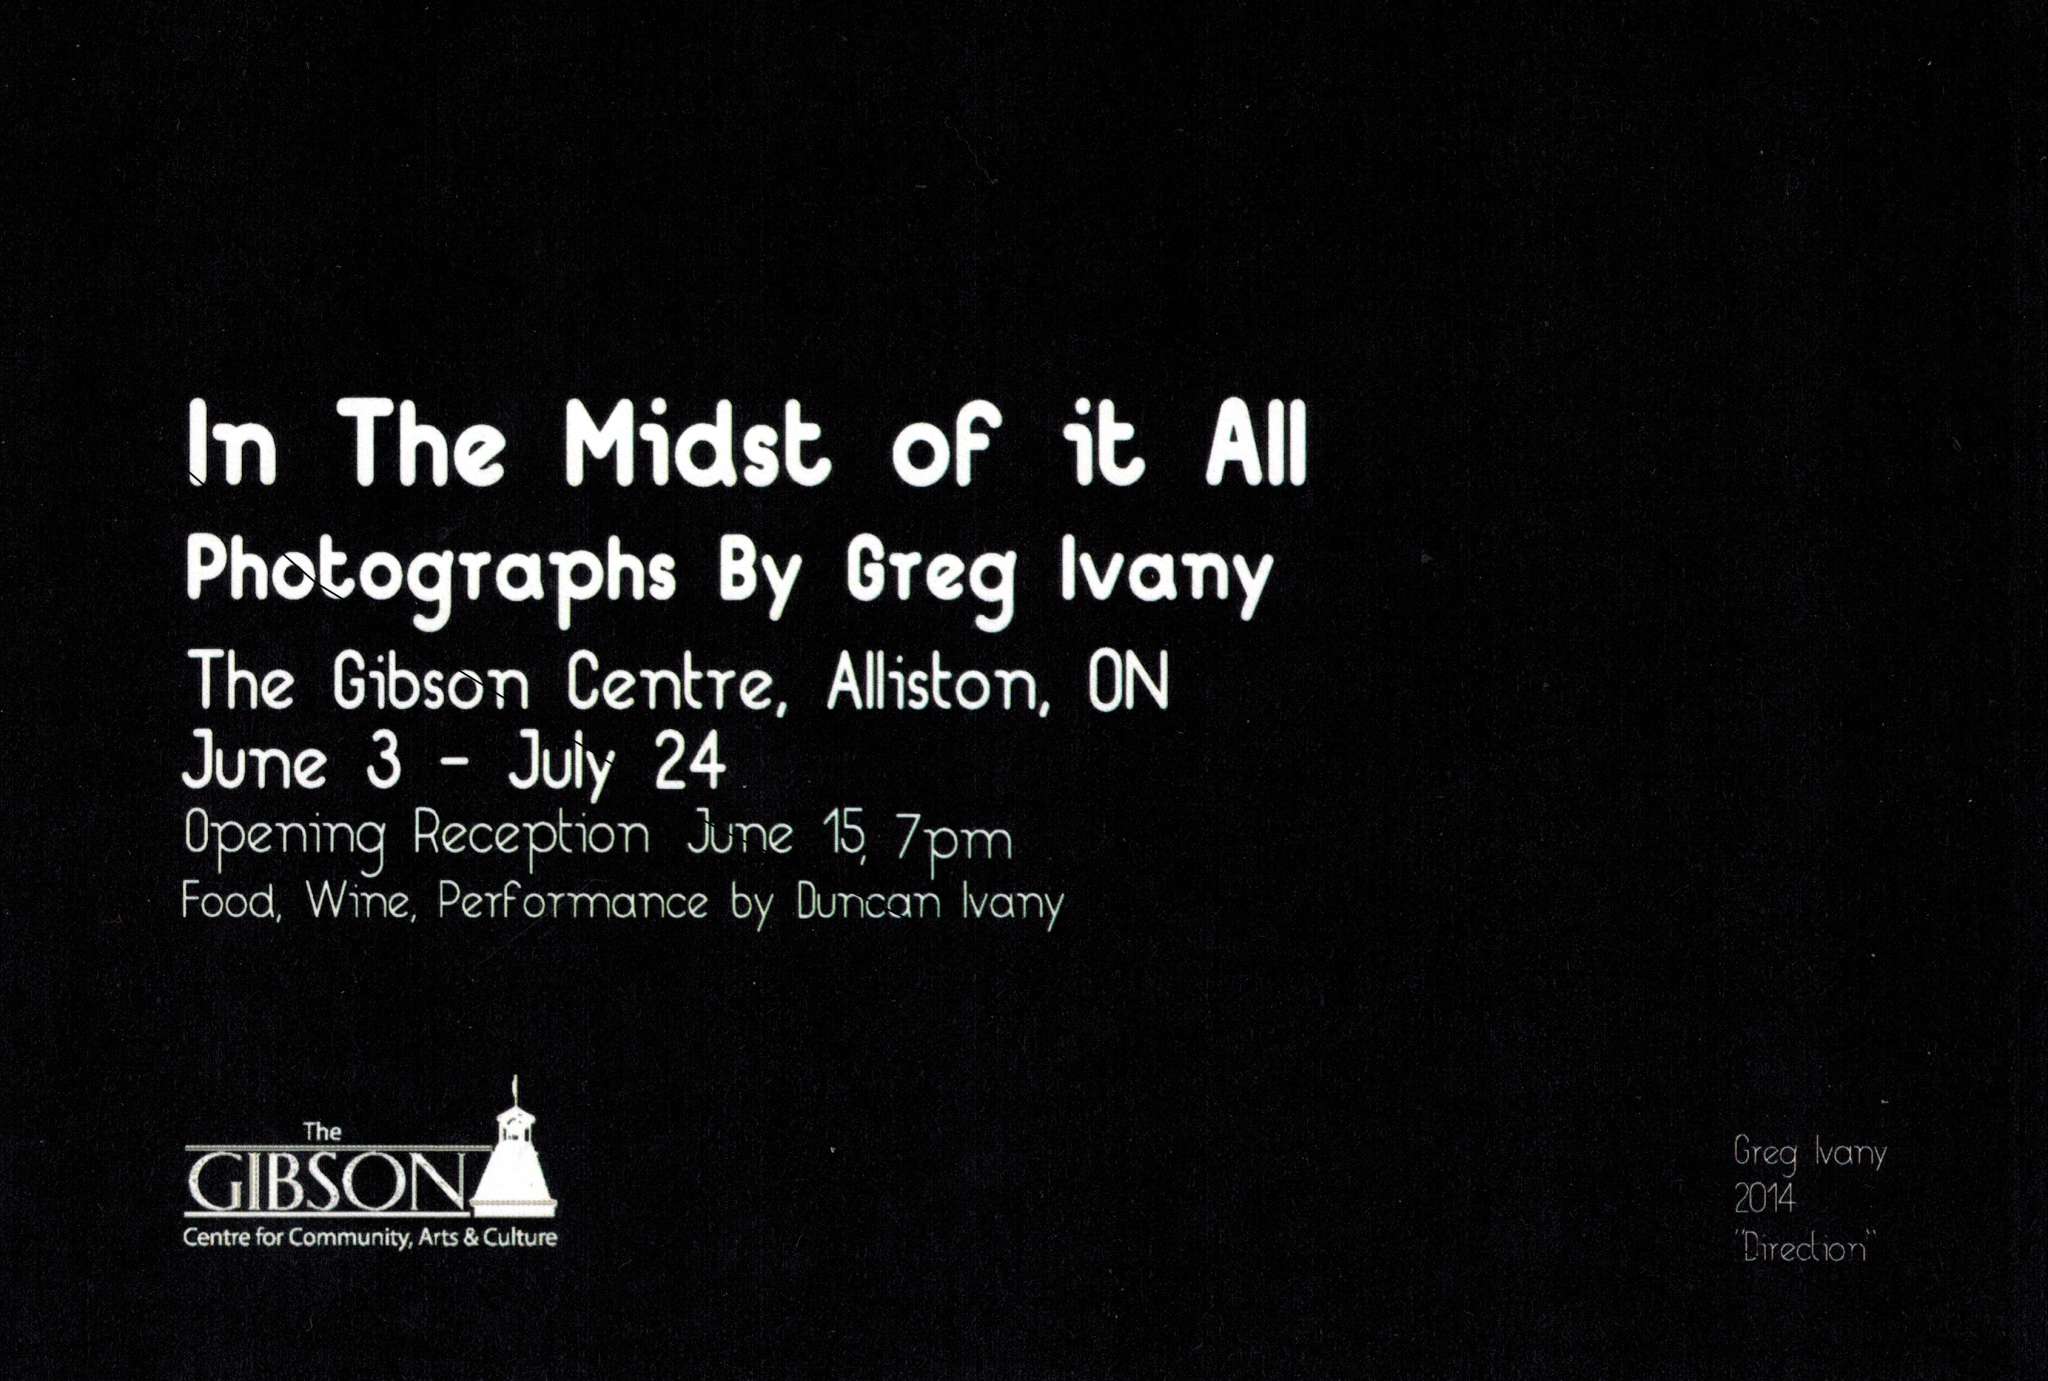 In The Midst of it All - Opening Reception